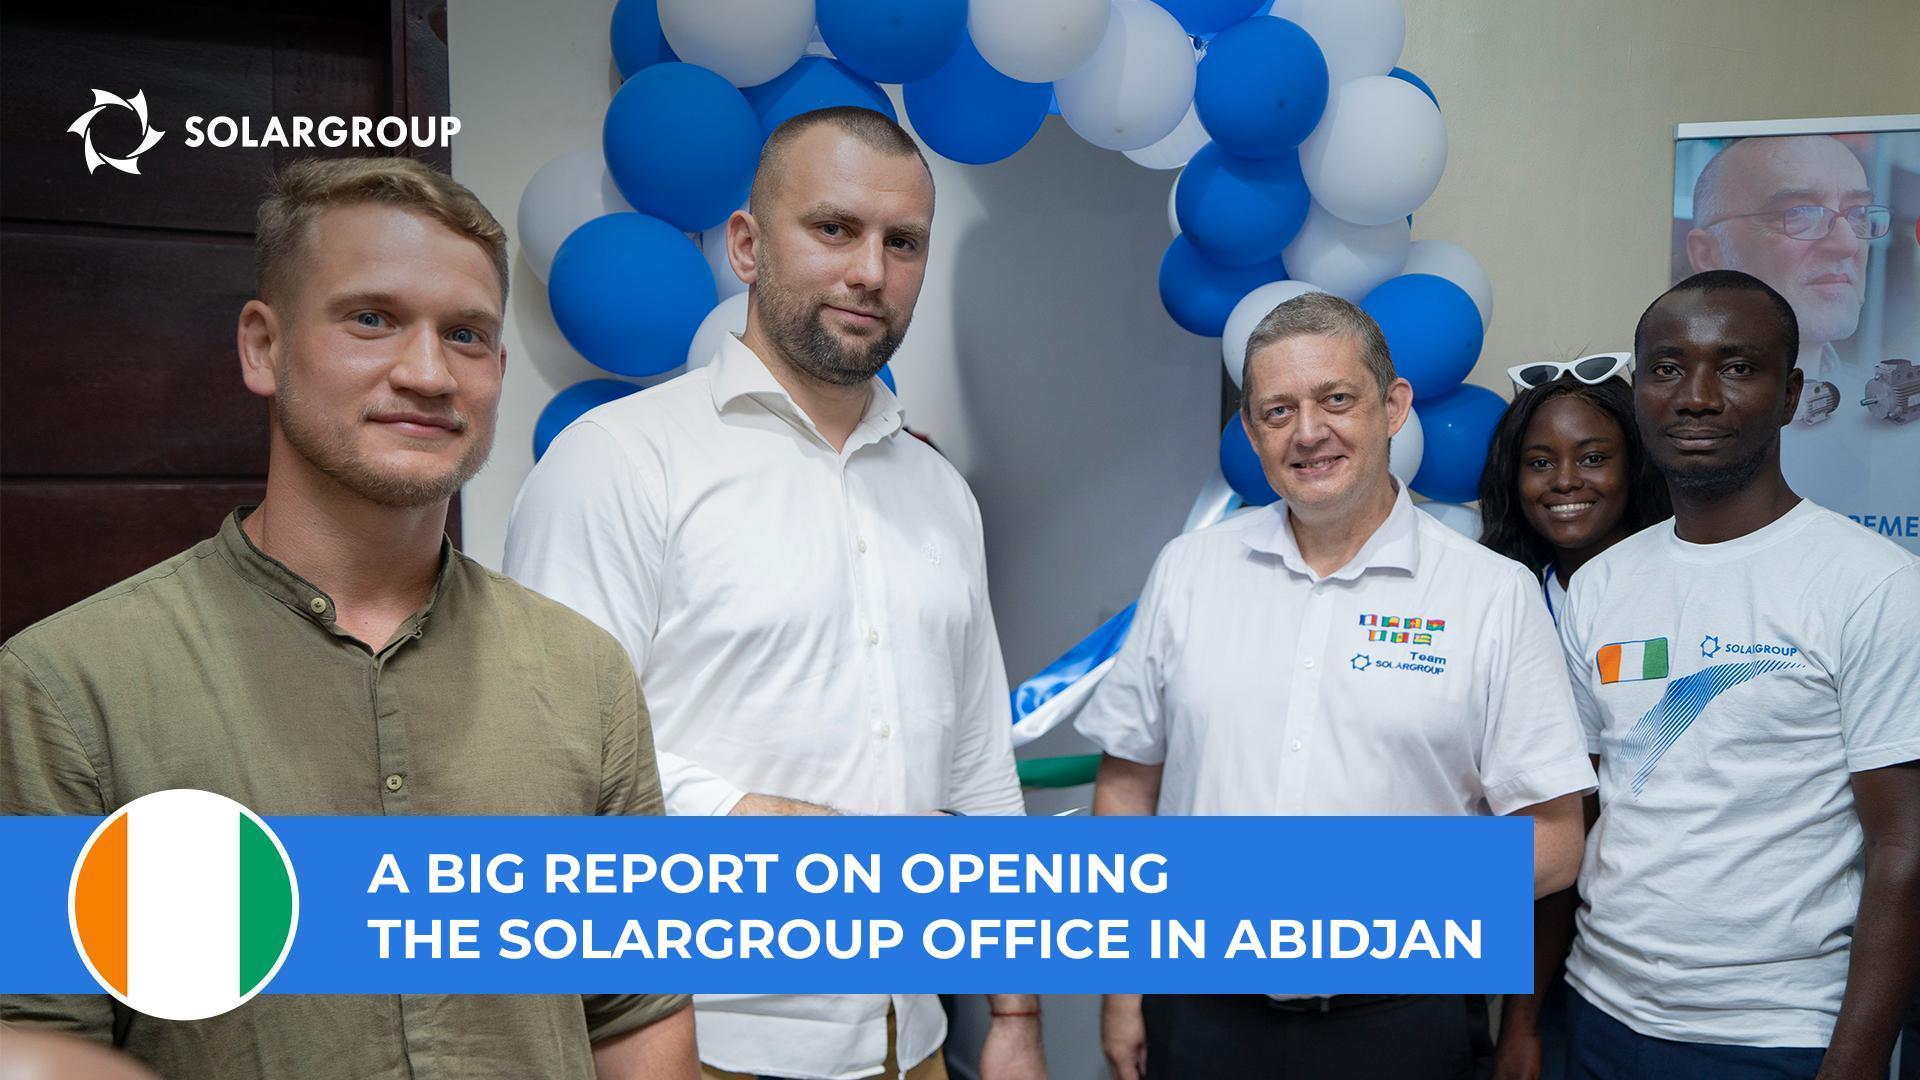 "Our dream has come true" - SOLARGROUP partners about opening an office in Côte d'Ivoire